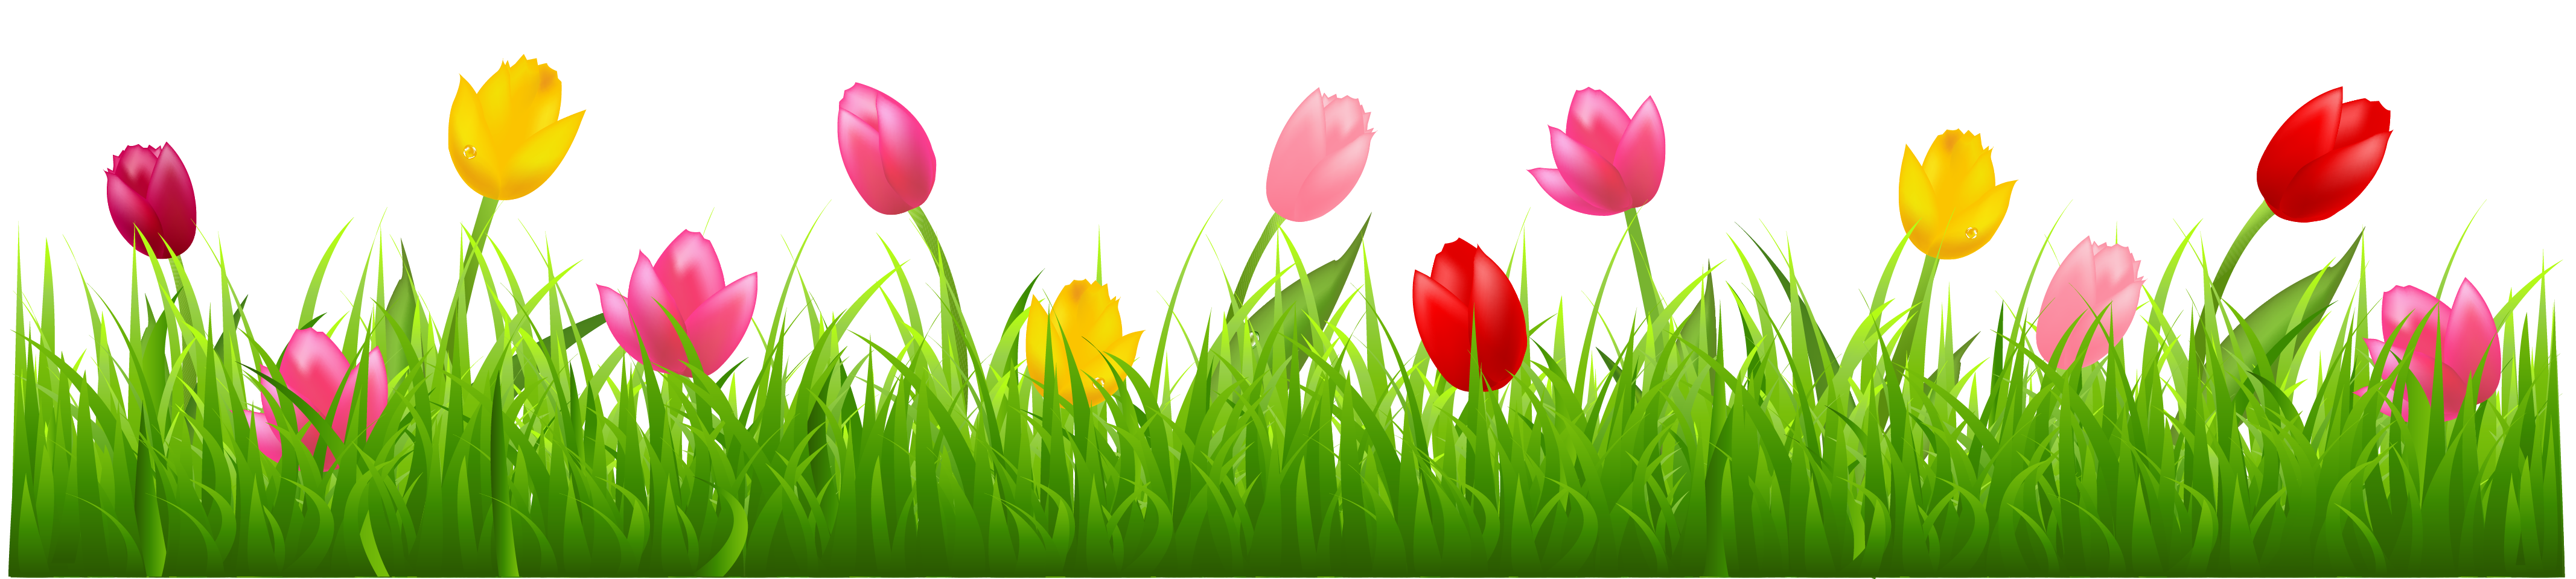 Grass withlorful tulips clipart